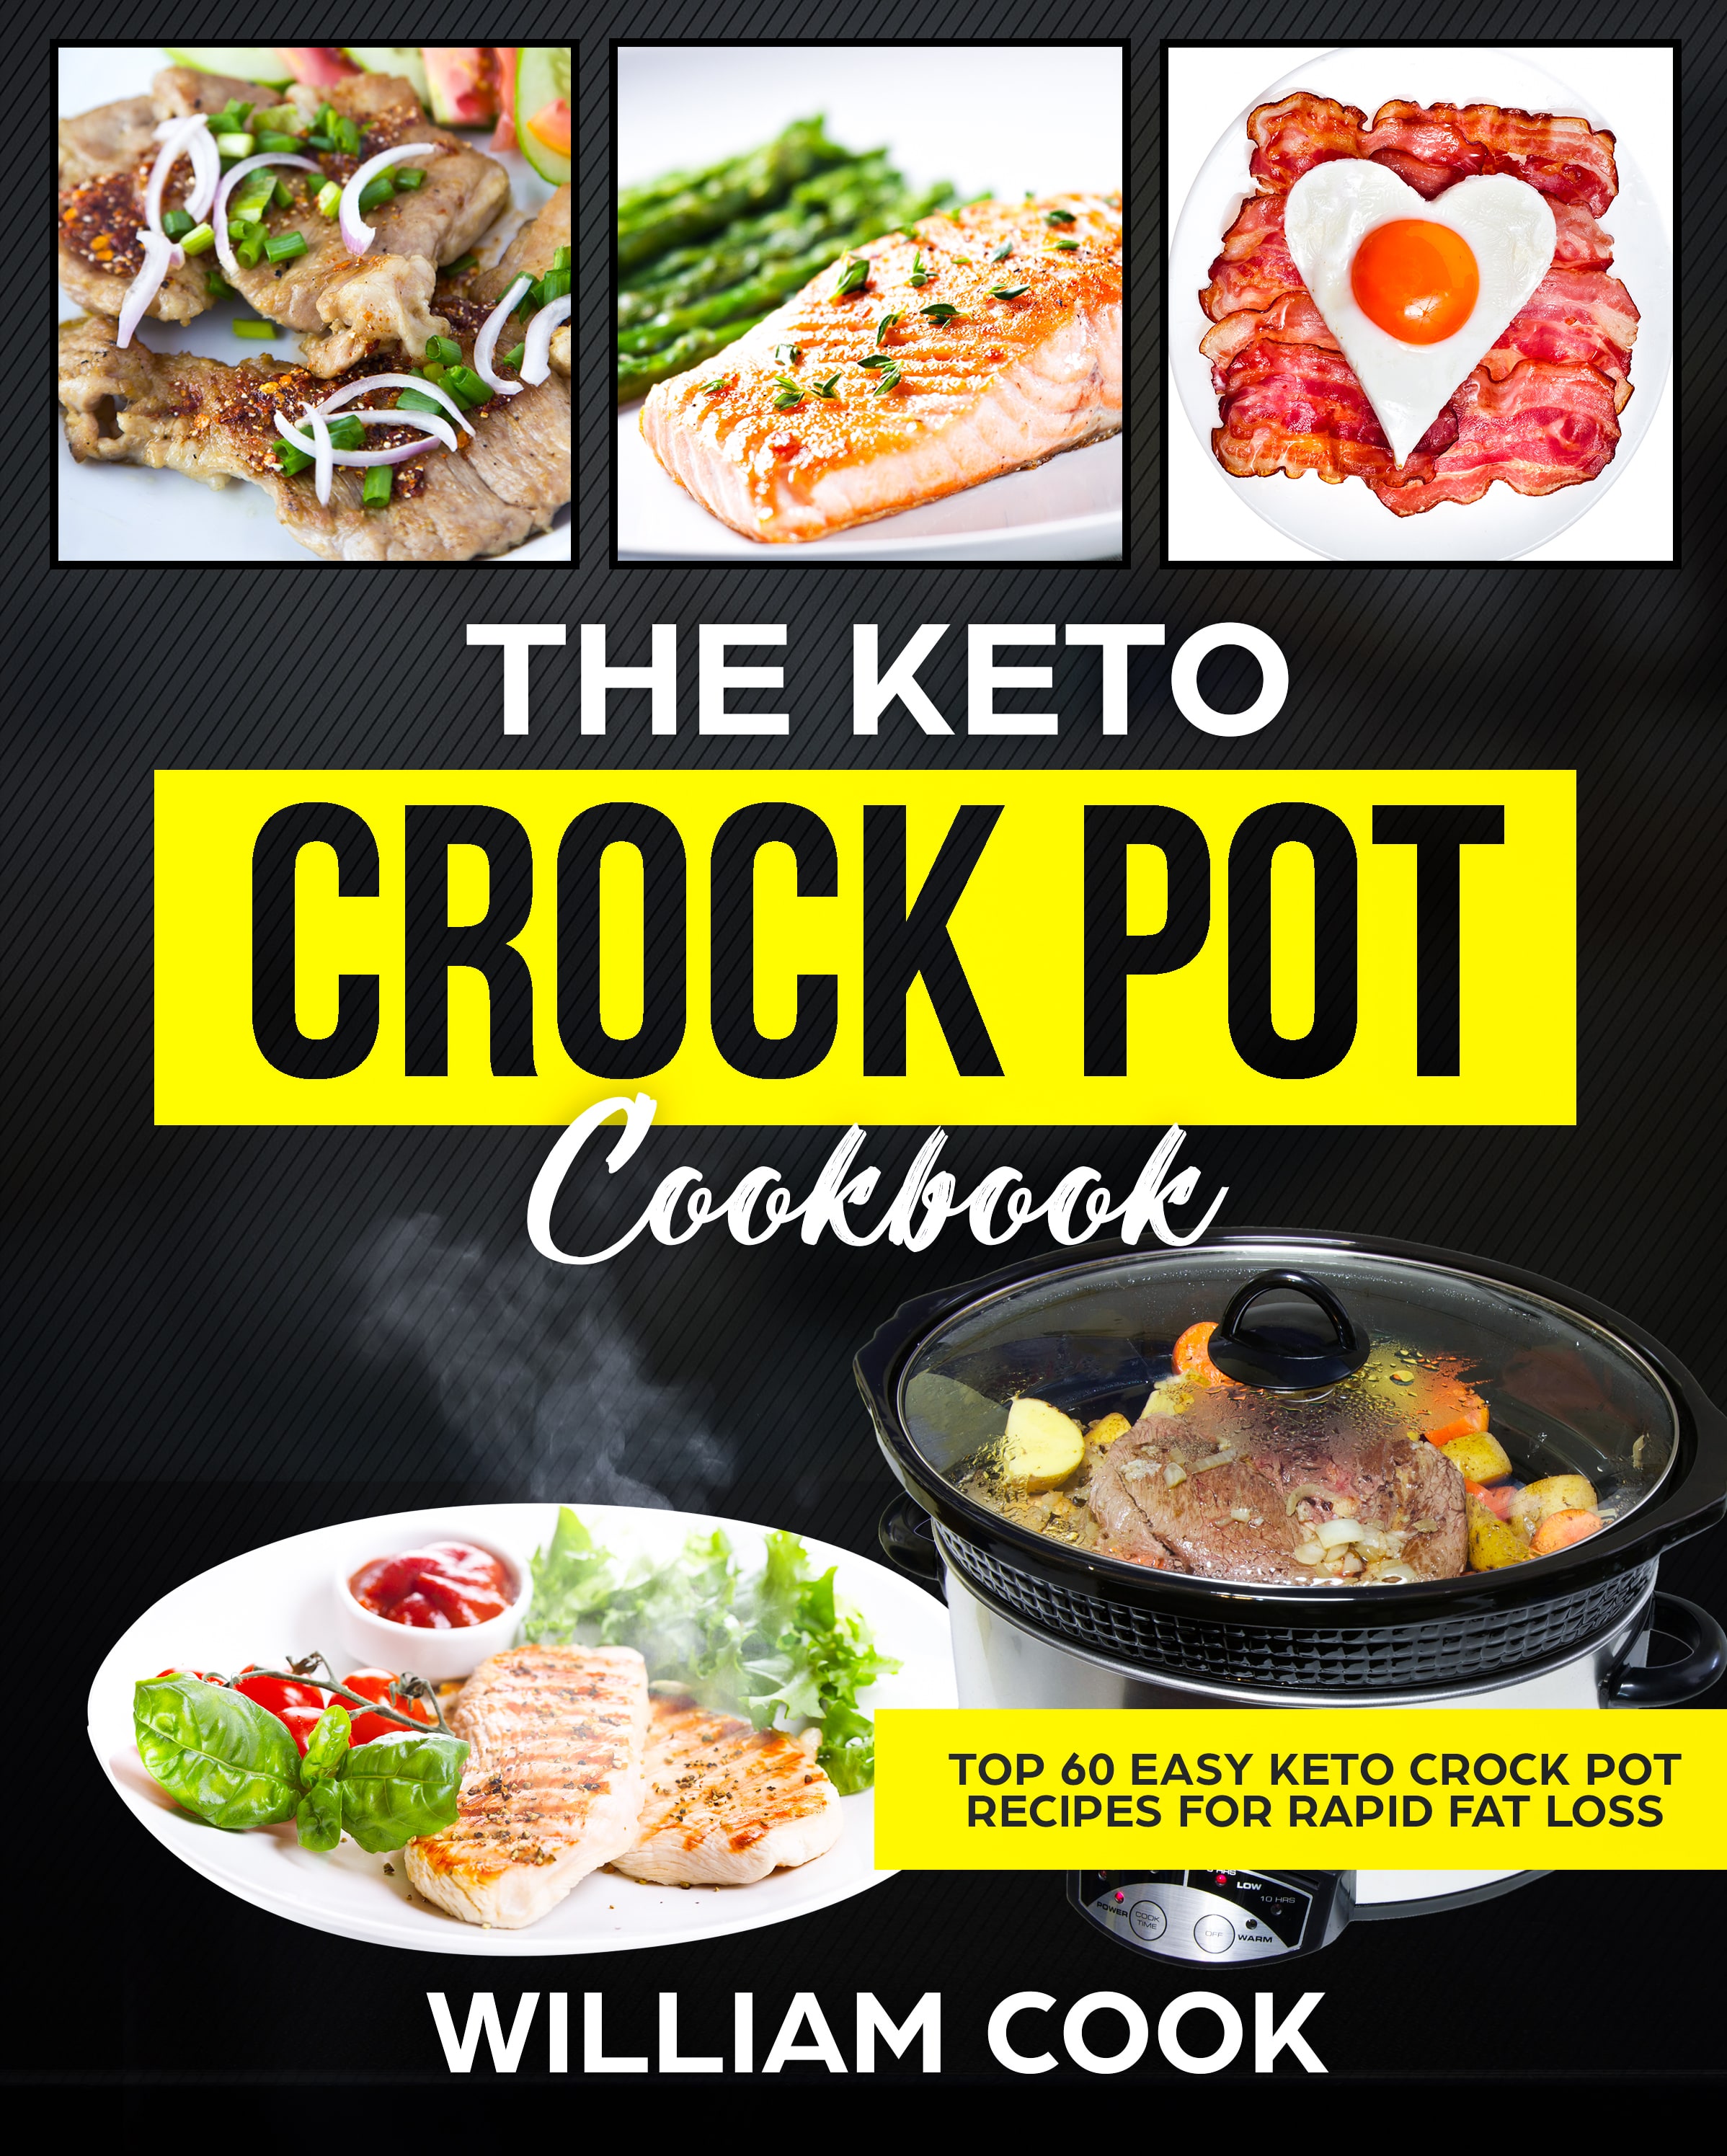 FREE: The Keto Crock Pot Cookbook: Top 60 Easy Keto Crock Pot Recipes For Rapid Fat Loss by William Cook by William Cook